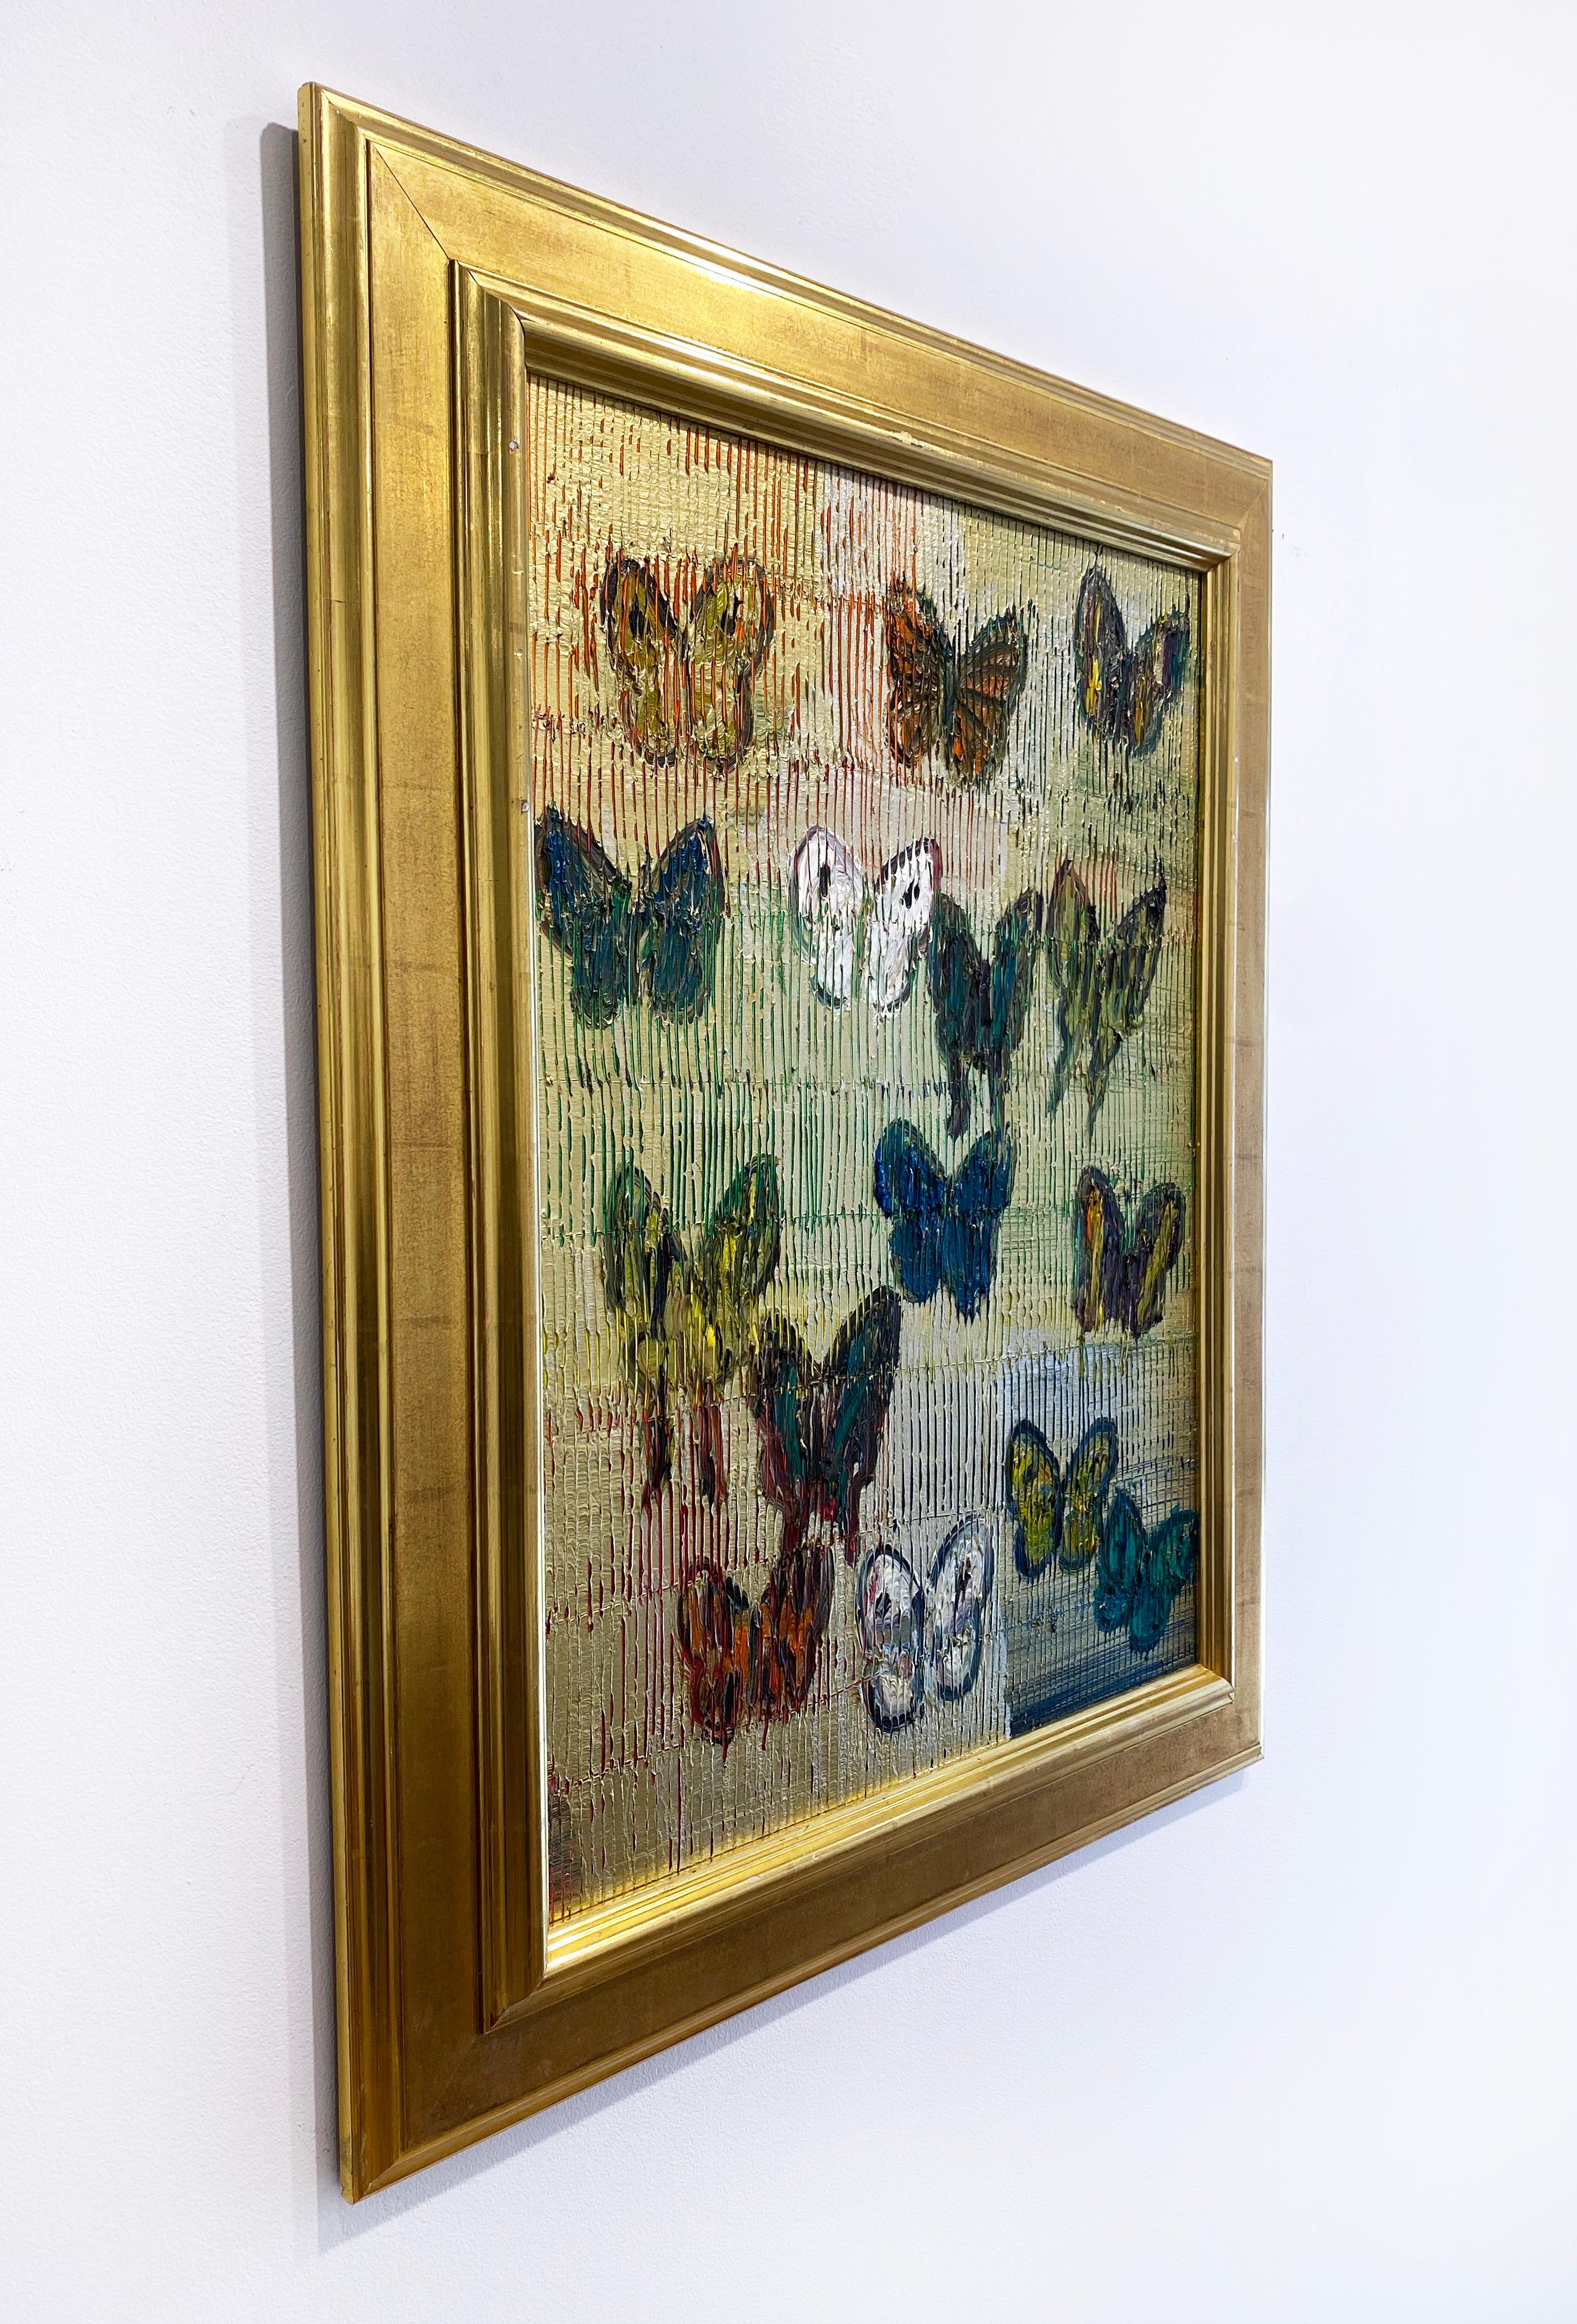 'Soar I' 2021 by renowned New York City artist, Hunt Slonem. Oil on wood, 30 x 22 in. Framed dimmension is 37.5 x 29 in. This painting features a charming portrait of colorful butterflies. The butterflies are painted in a palette of colors of